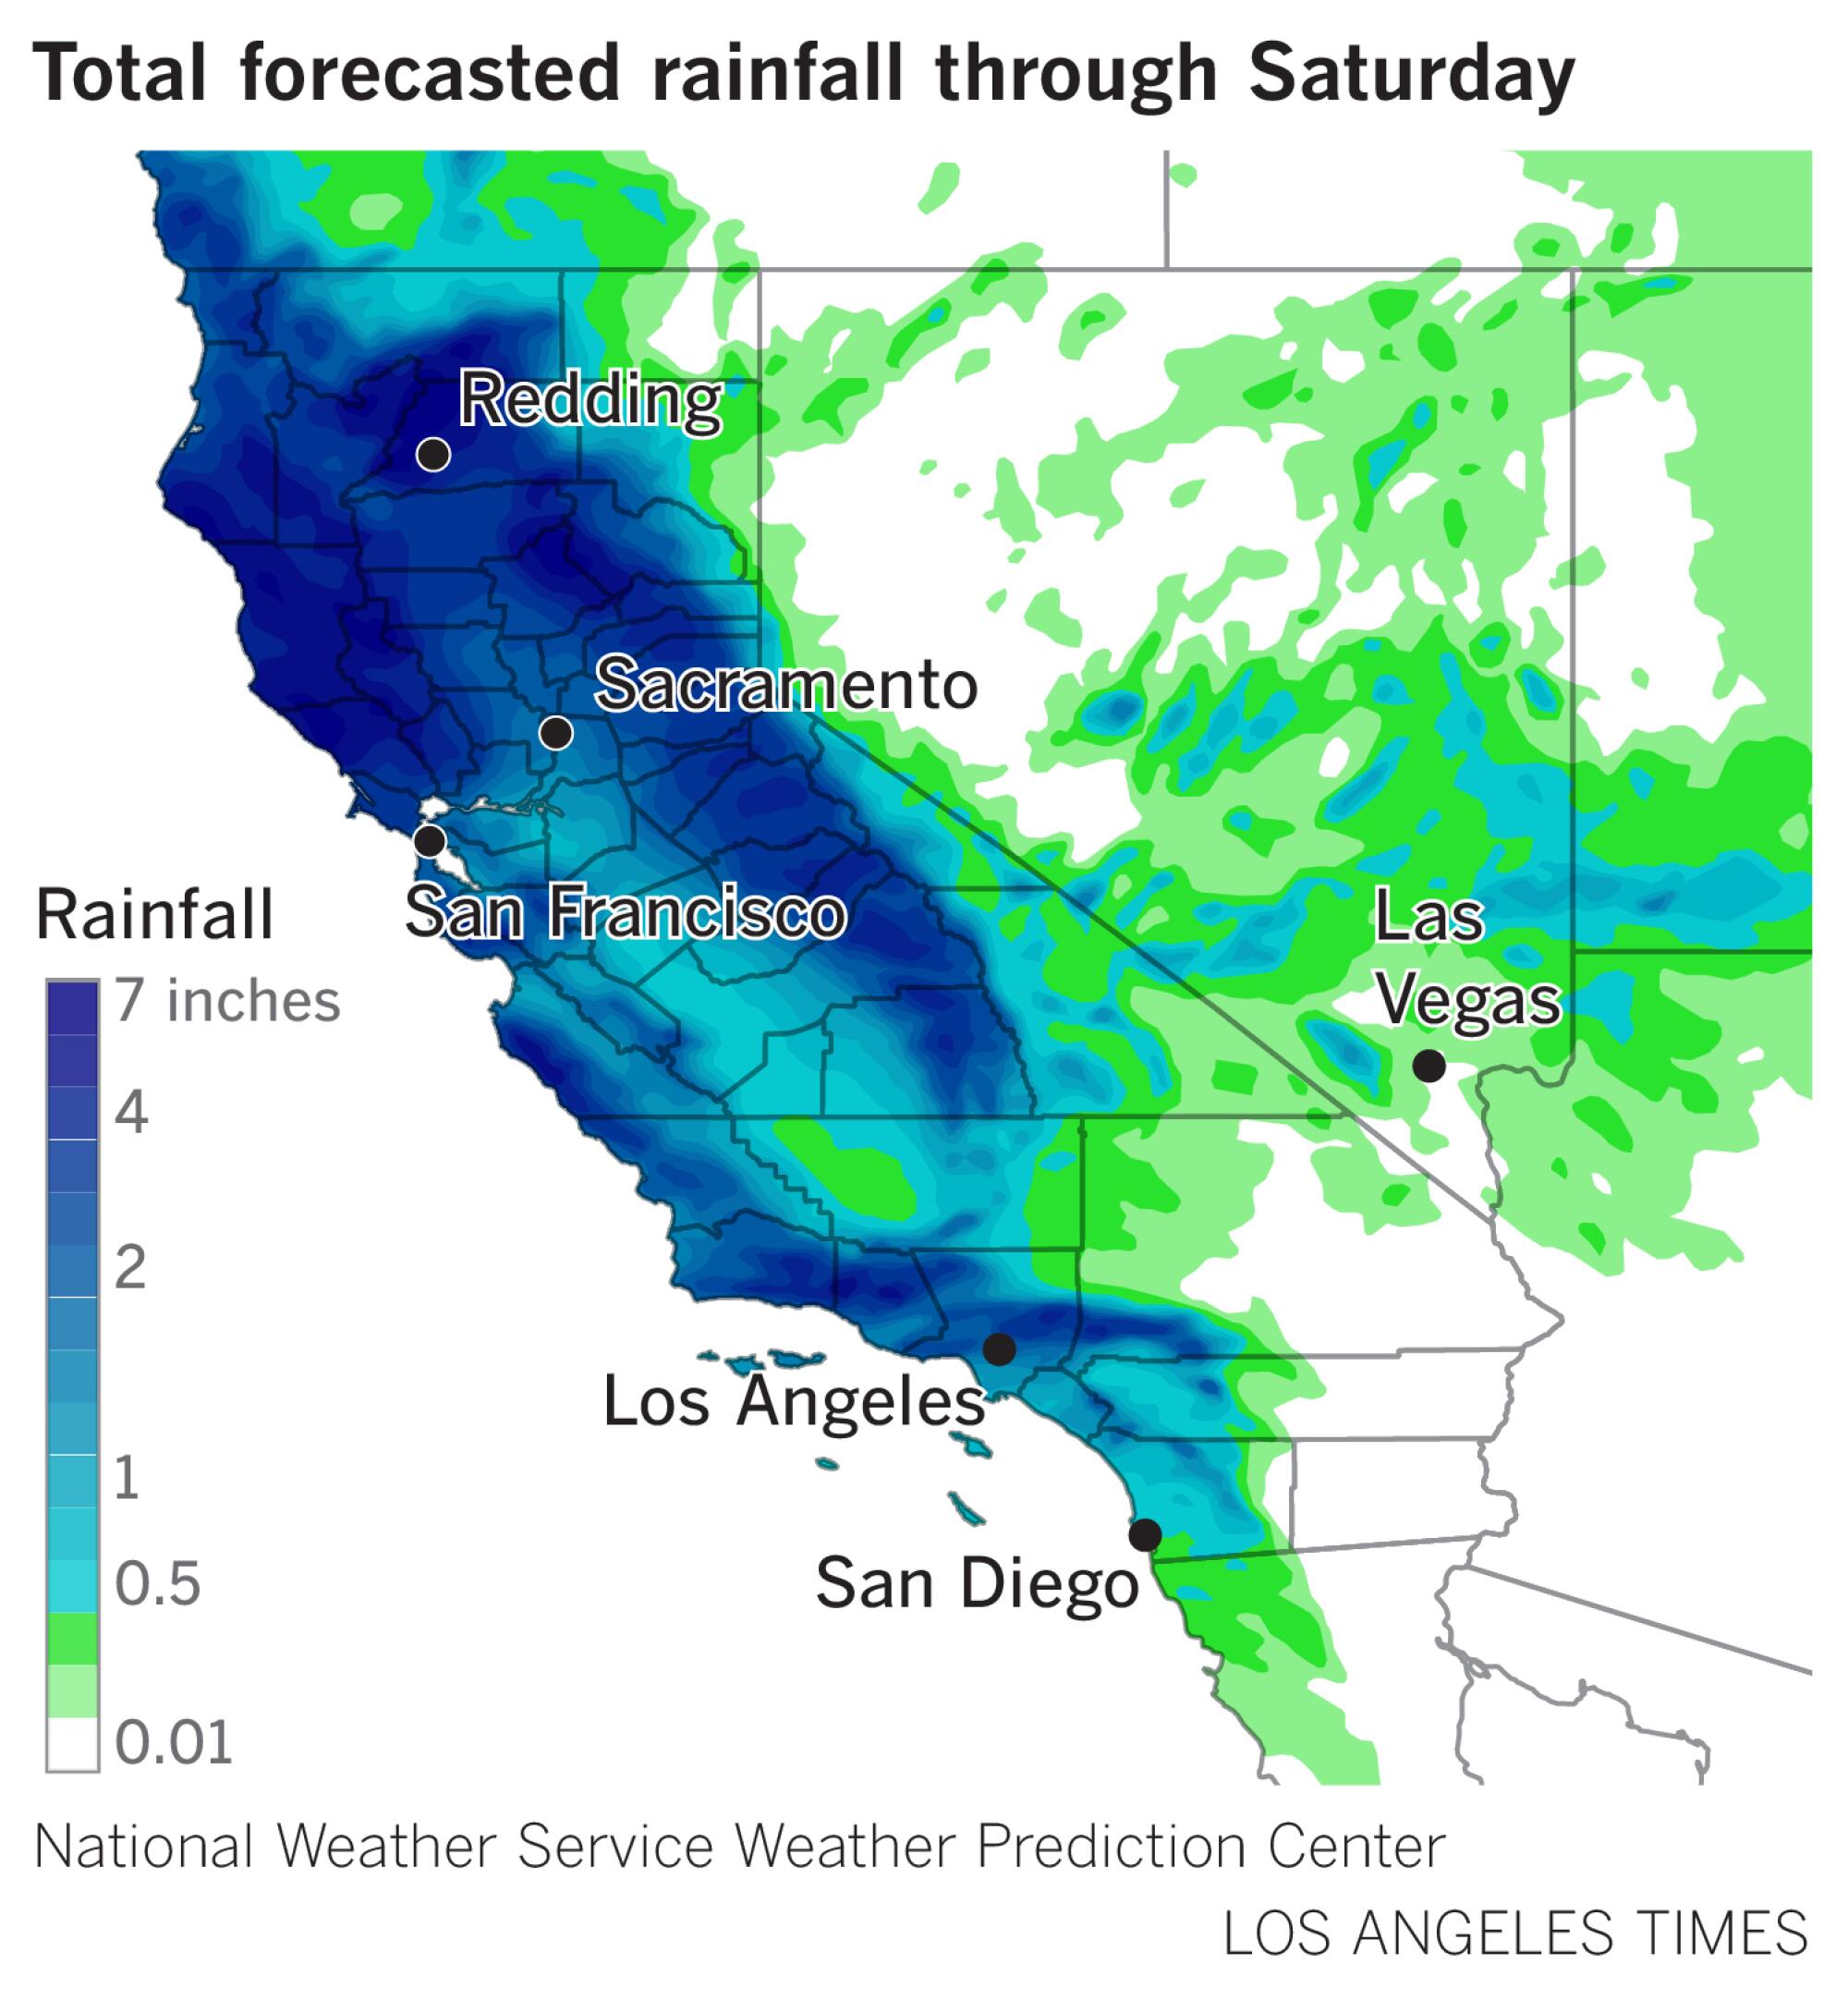 Map shows total forecasted rainfall of up to 7 inches in Northern California and in mountain areas.